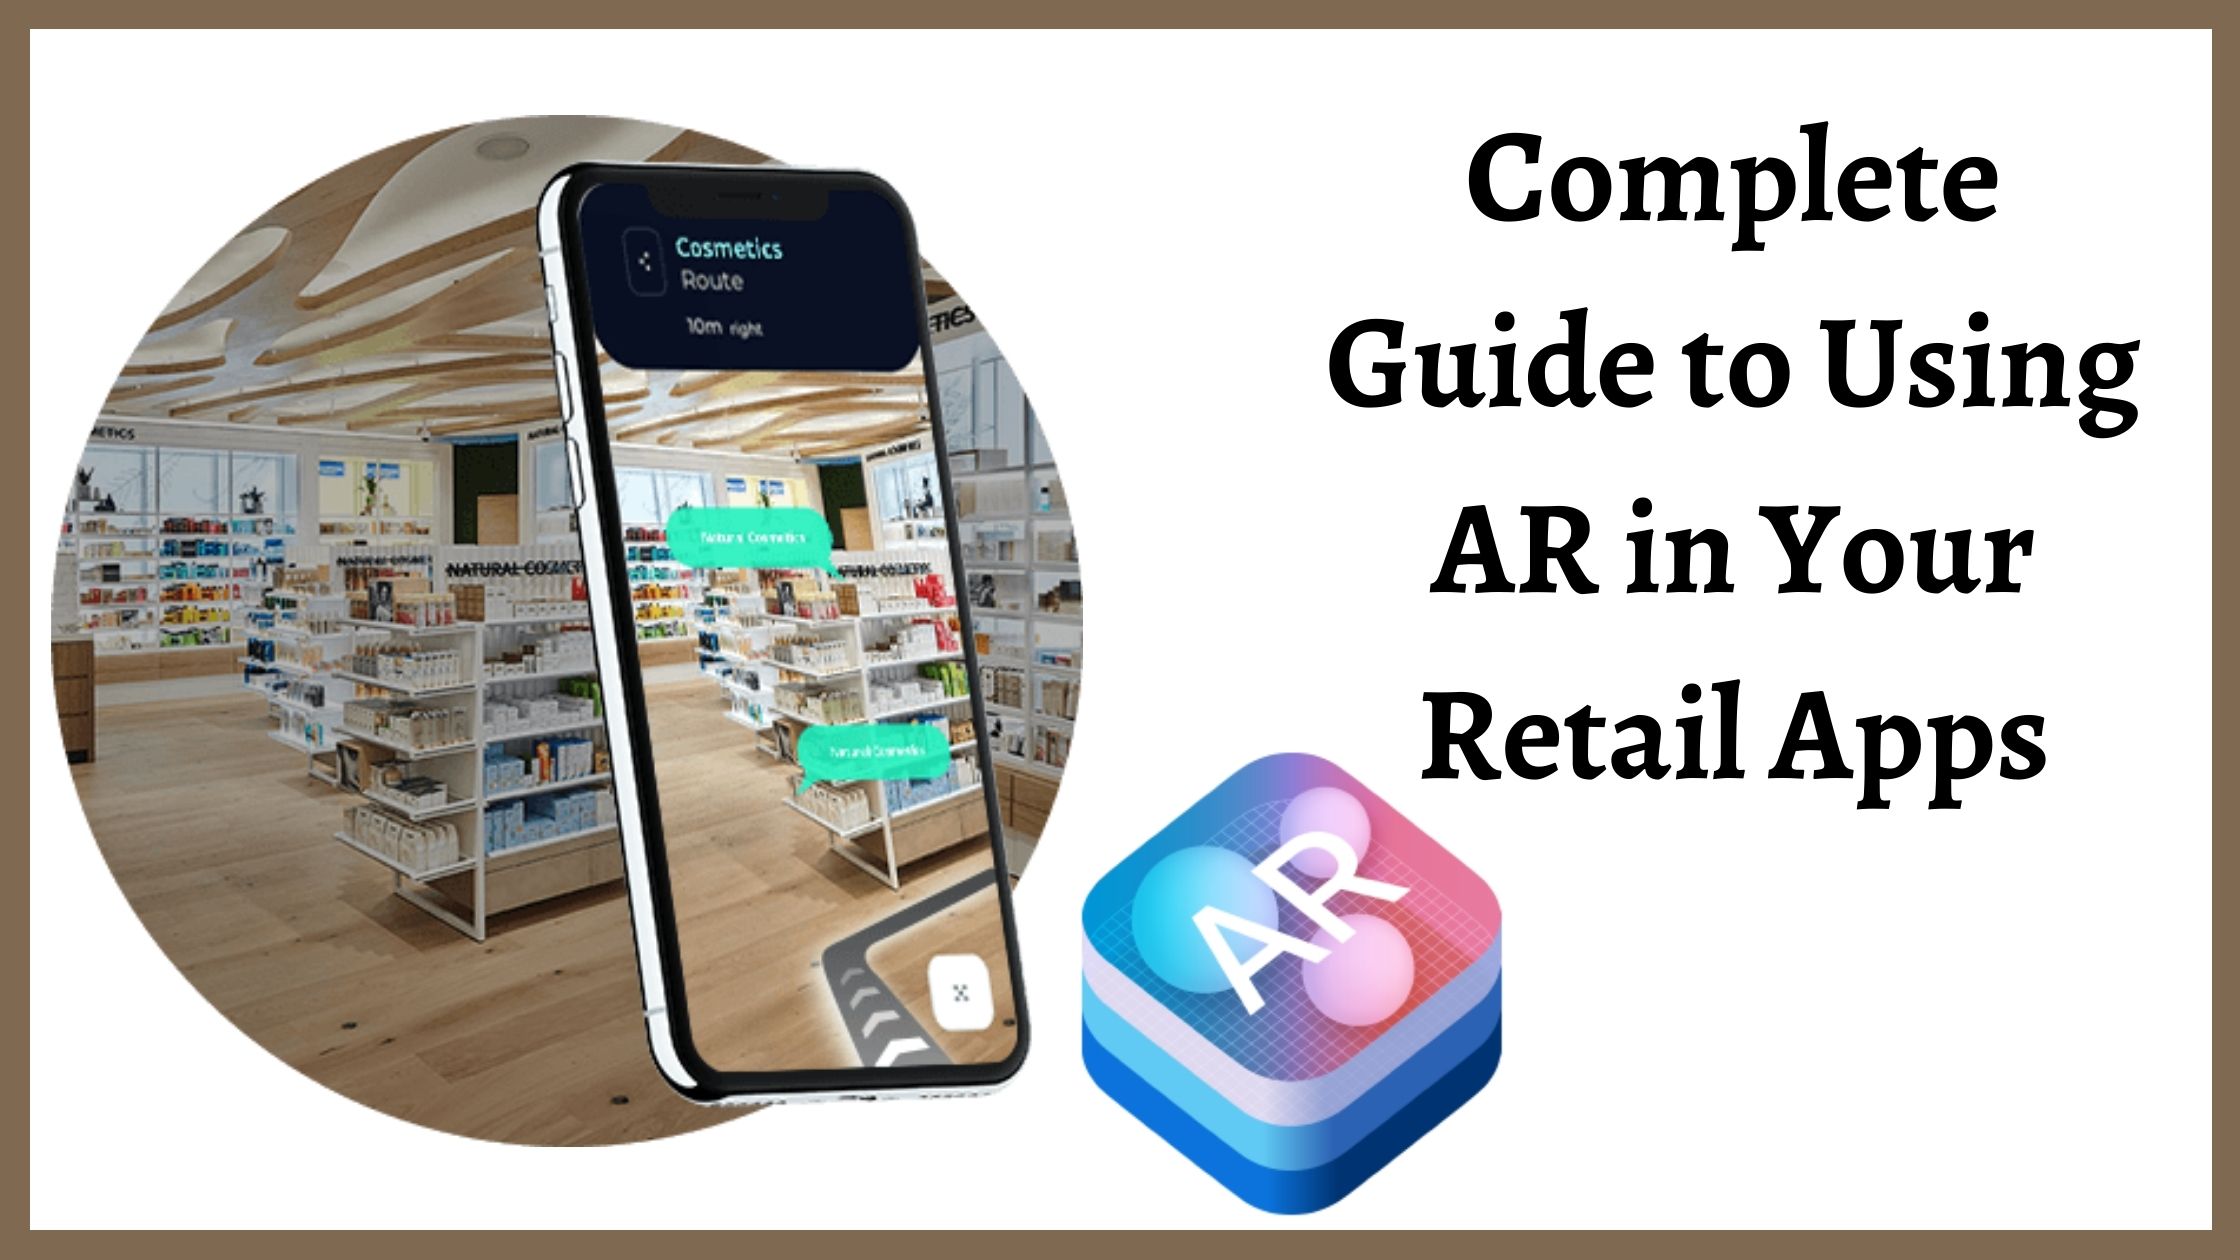 Complete Guide to Using AR in Your Retail-Apps